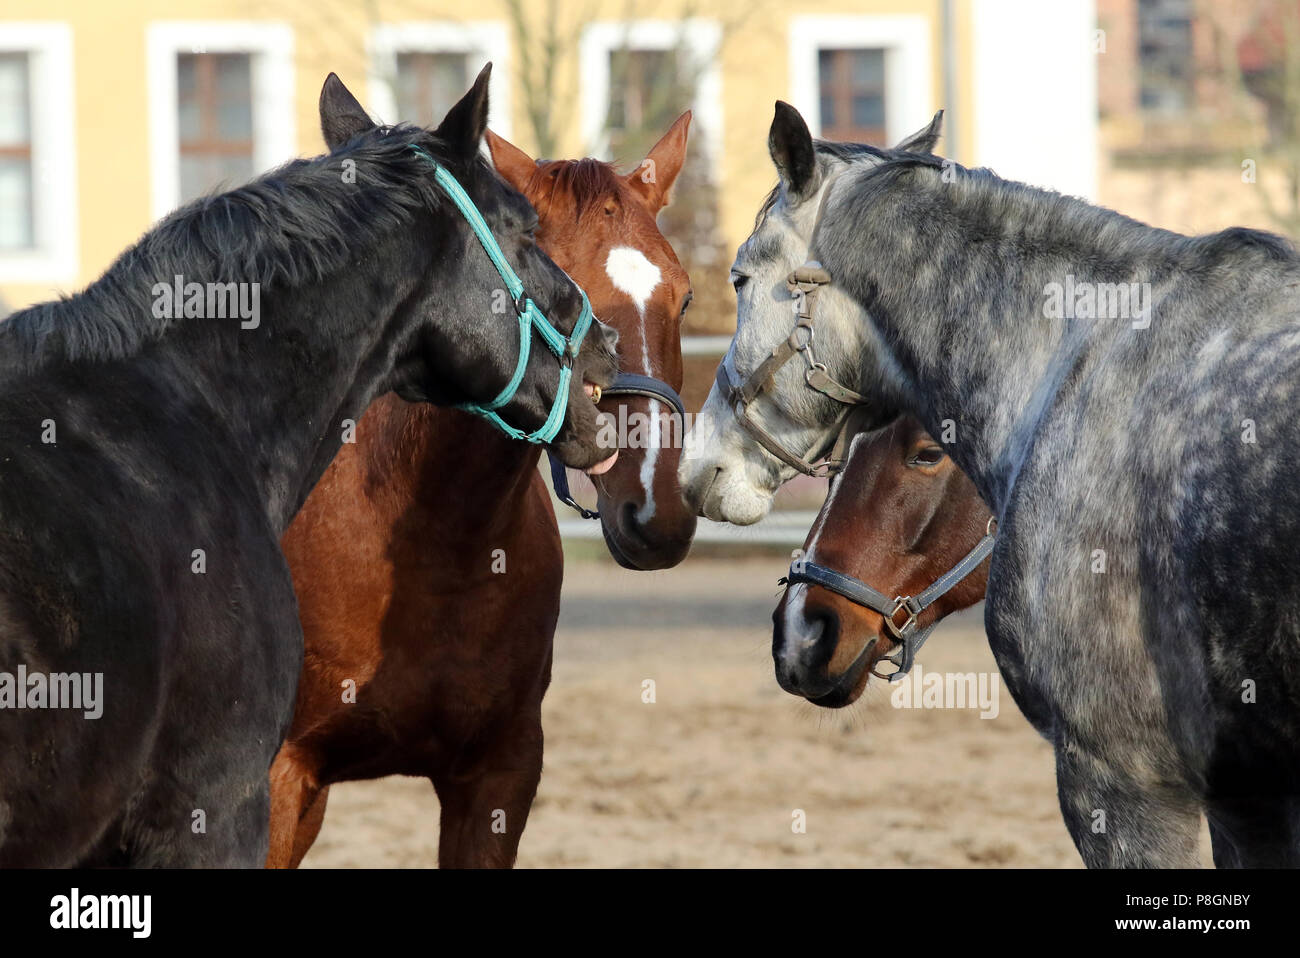 Neustadt (Dosse), horses are standing tight on a sand paddock Stock Photo